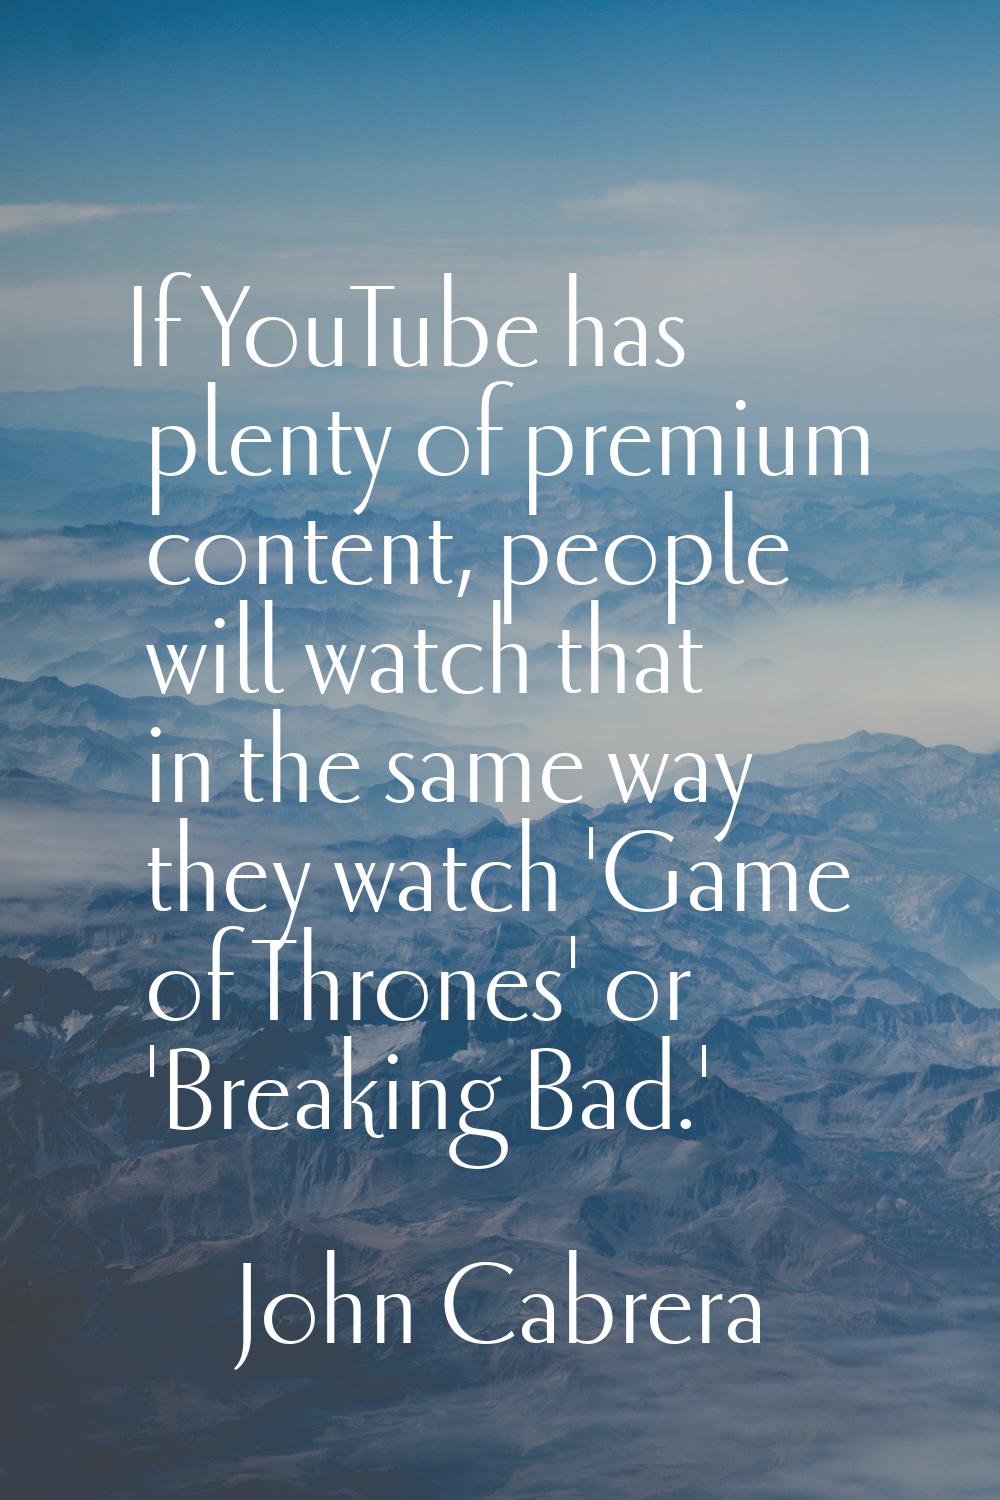 If YouTube has plenty of premium content, people will watch that in the same way they watch 'Game o